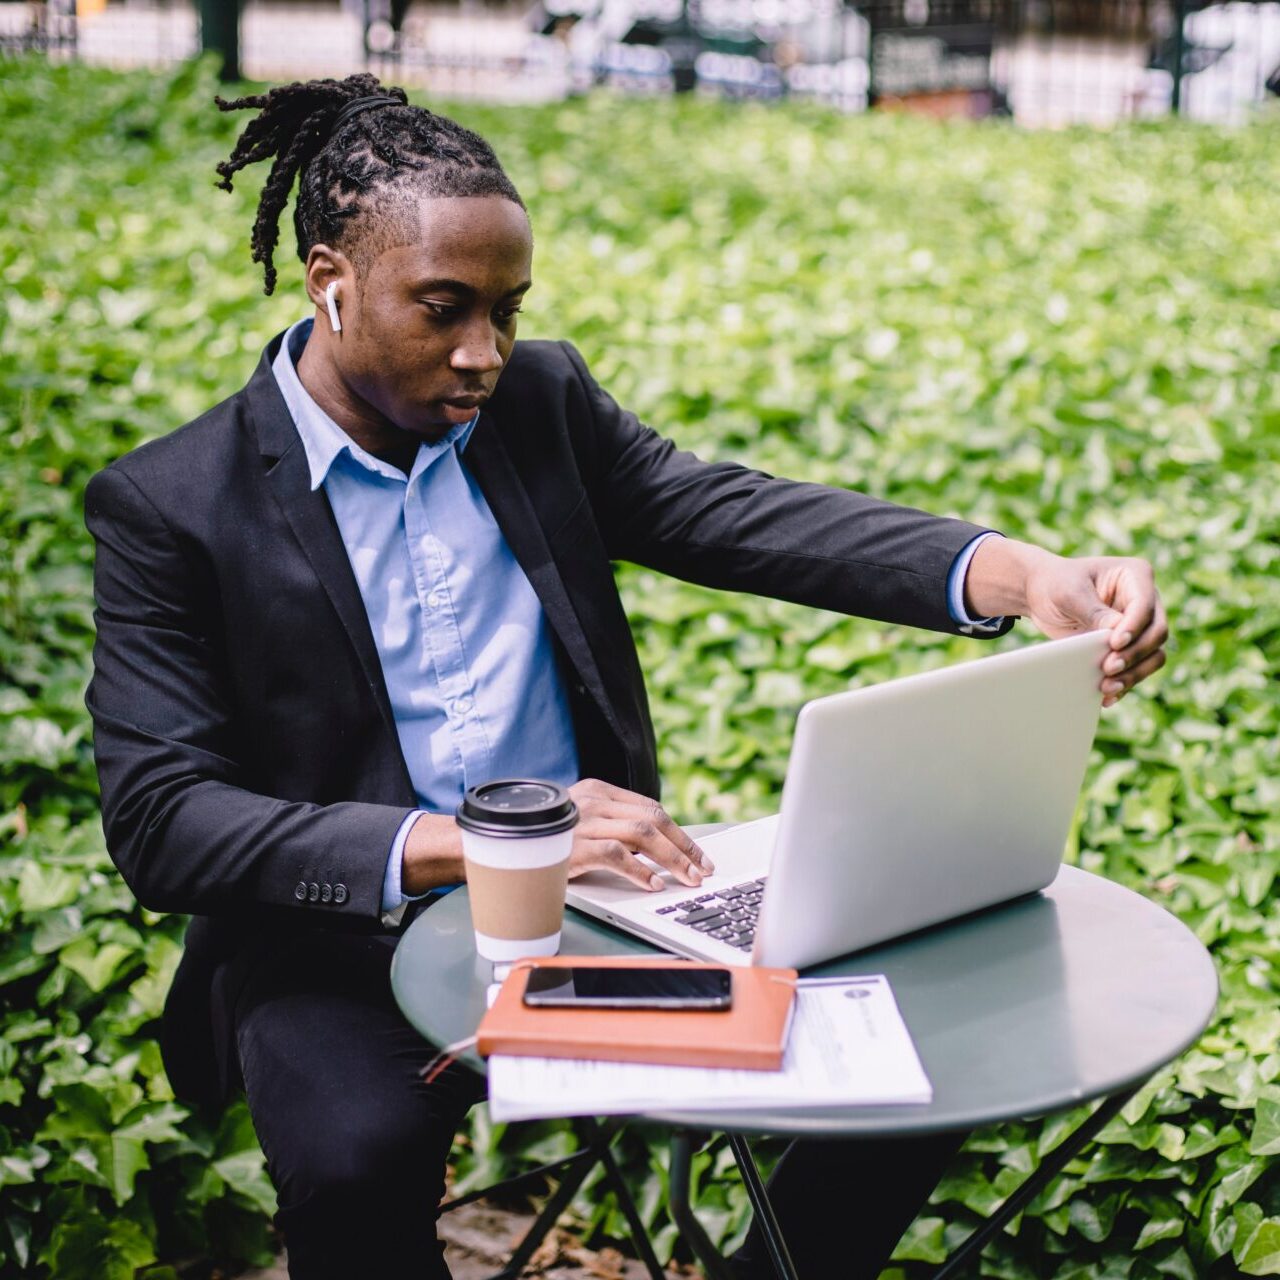 Man in business suit at a small table with a laptop in front of a shrub